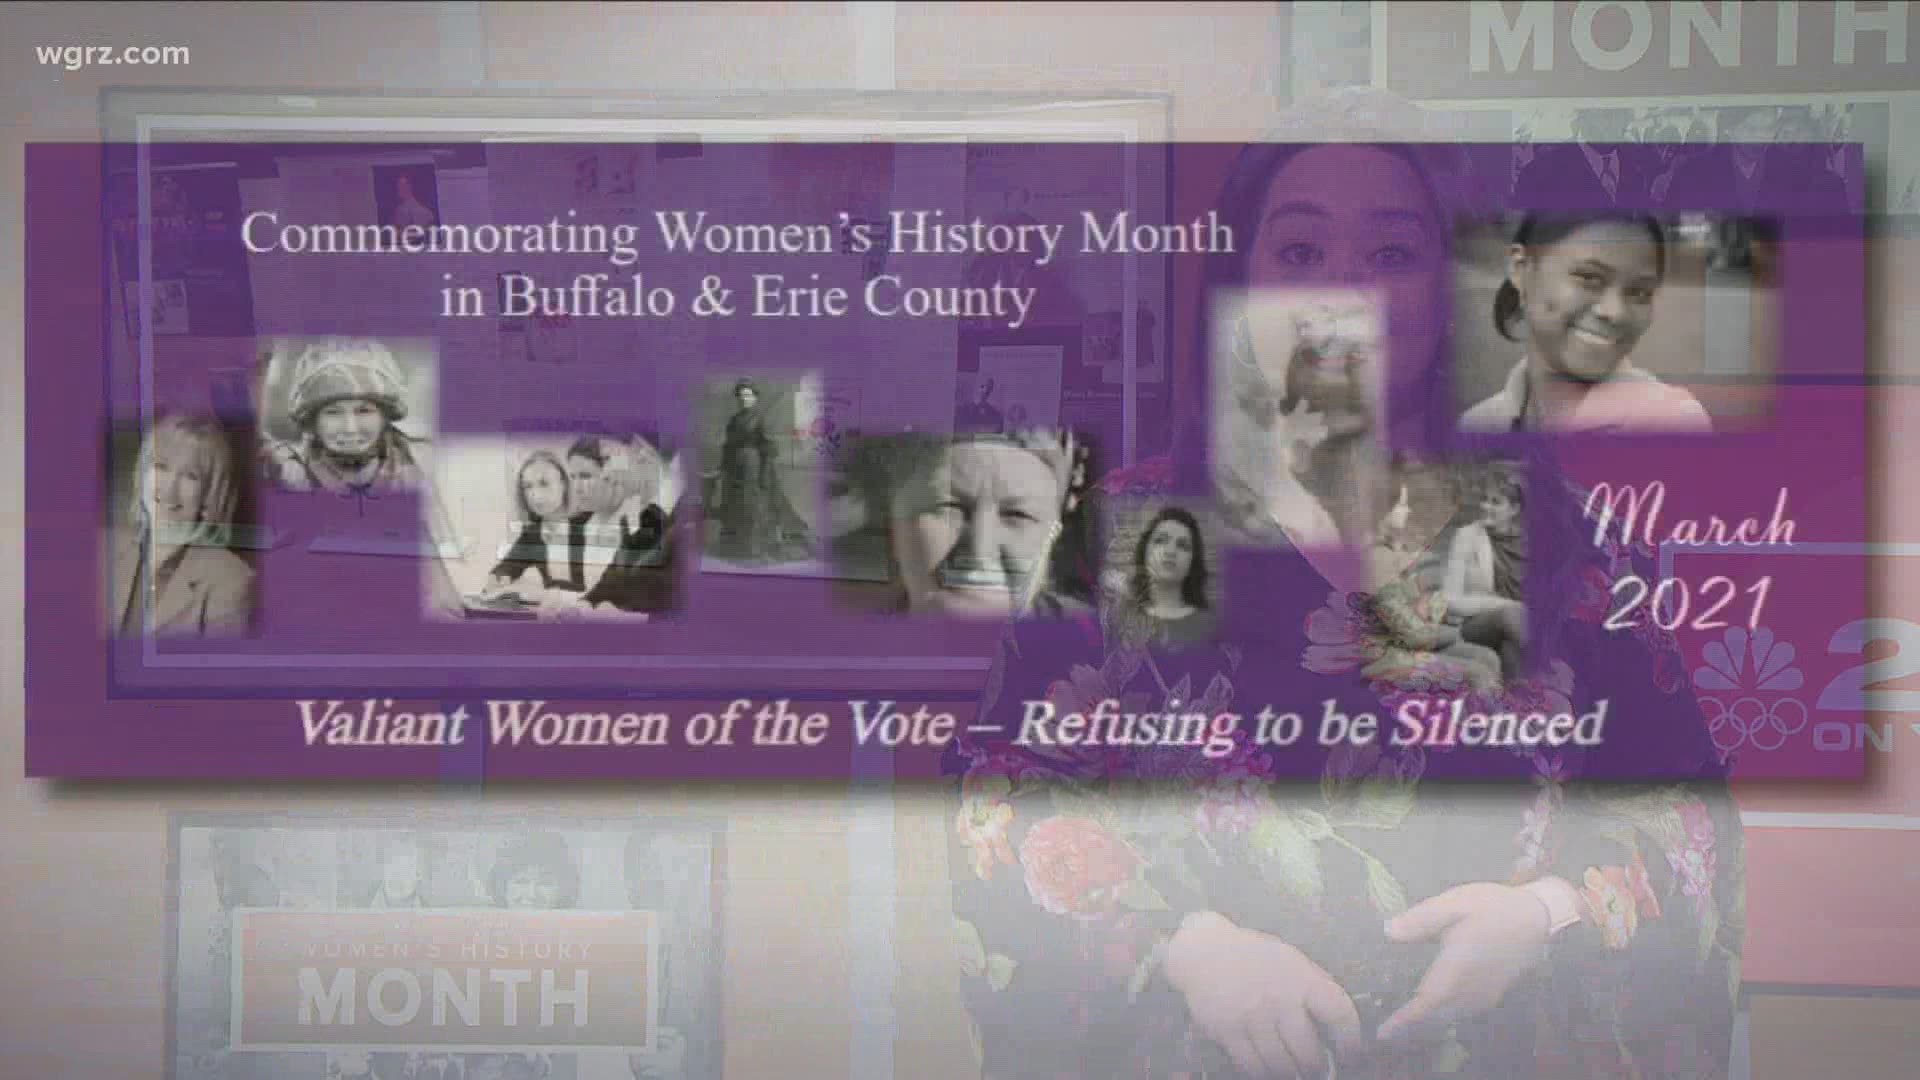 Here in Western New York, several organizations and attractions are celebrating the impacts women have made throughout history.